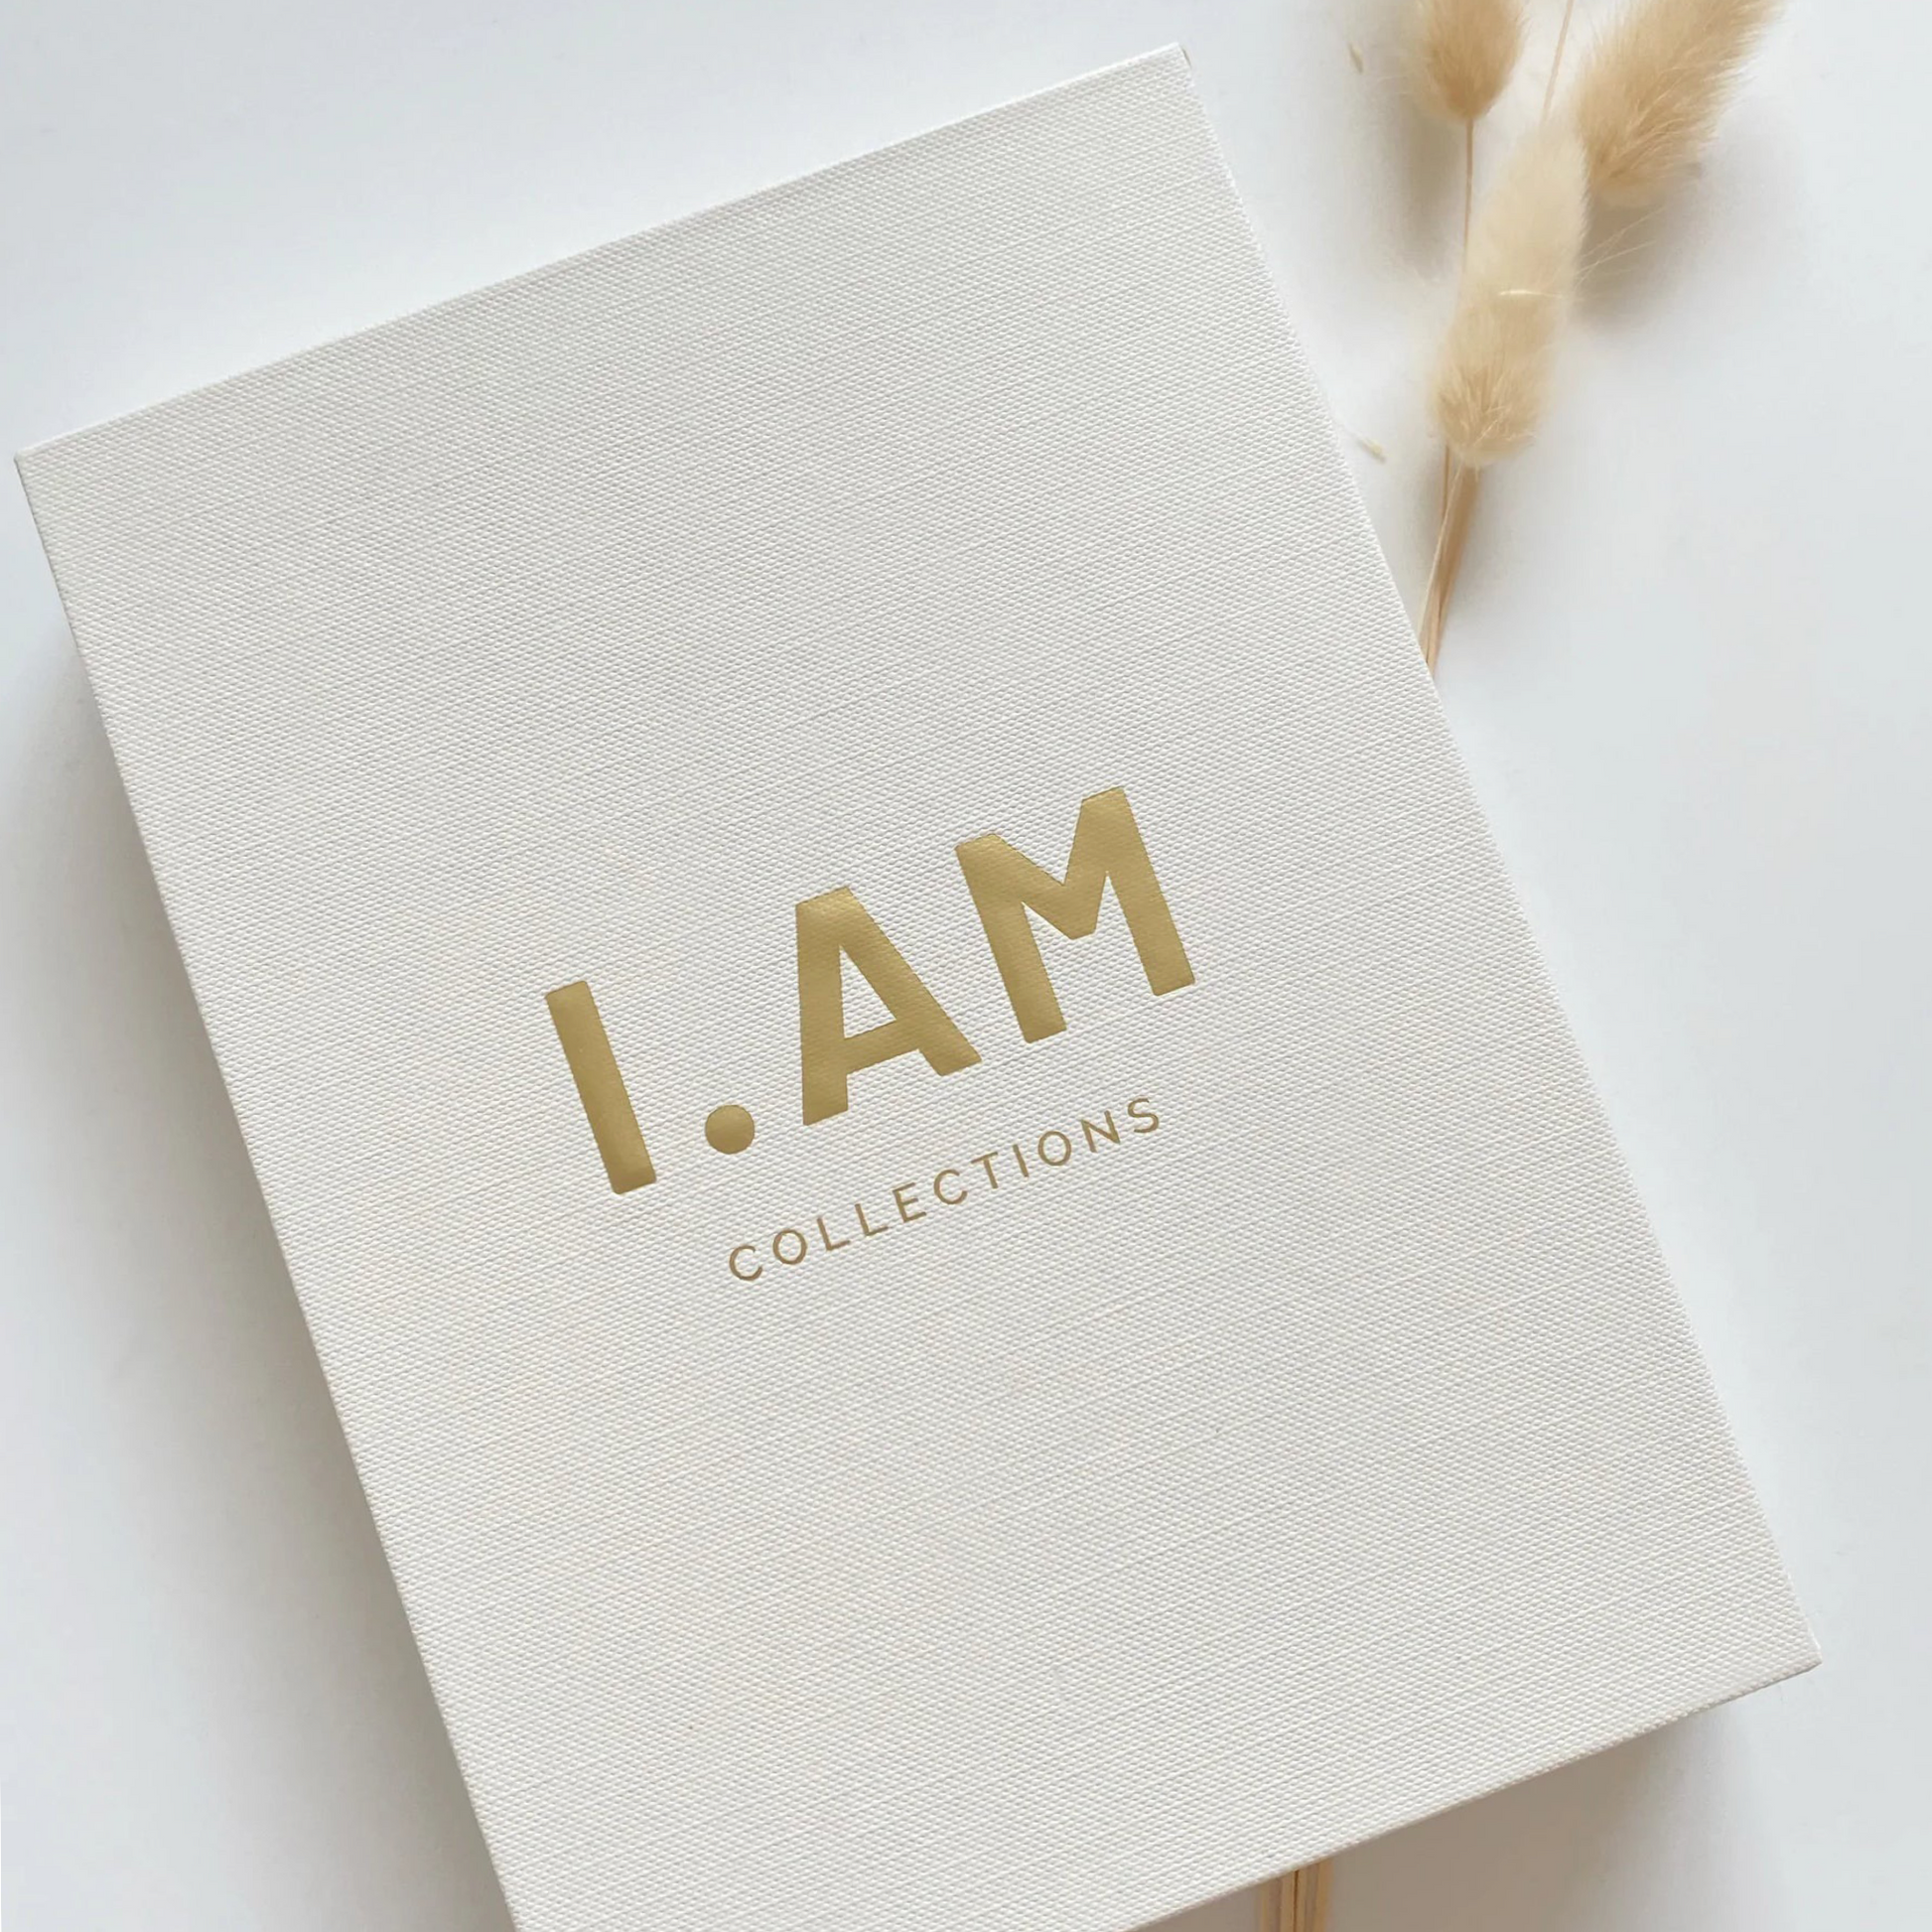 Affirmation Cards I.AM Collections